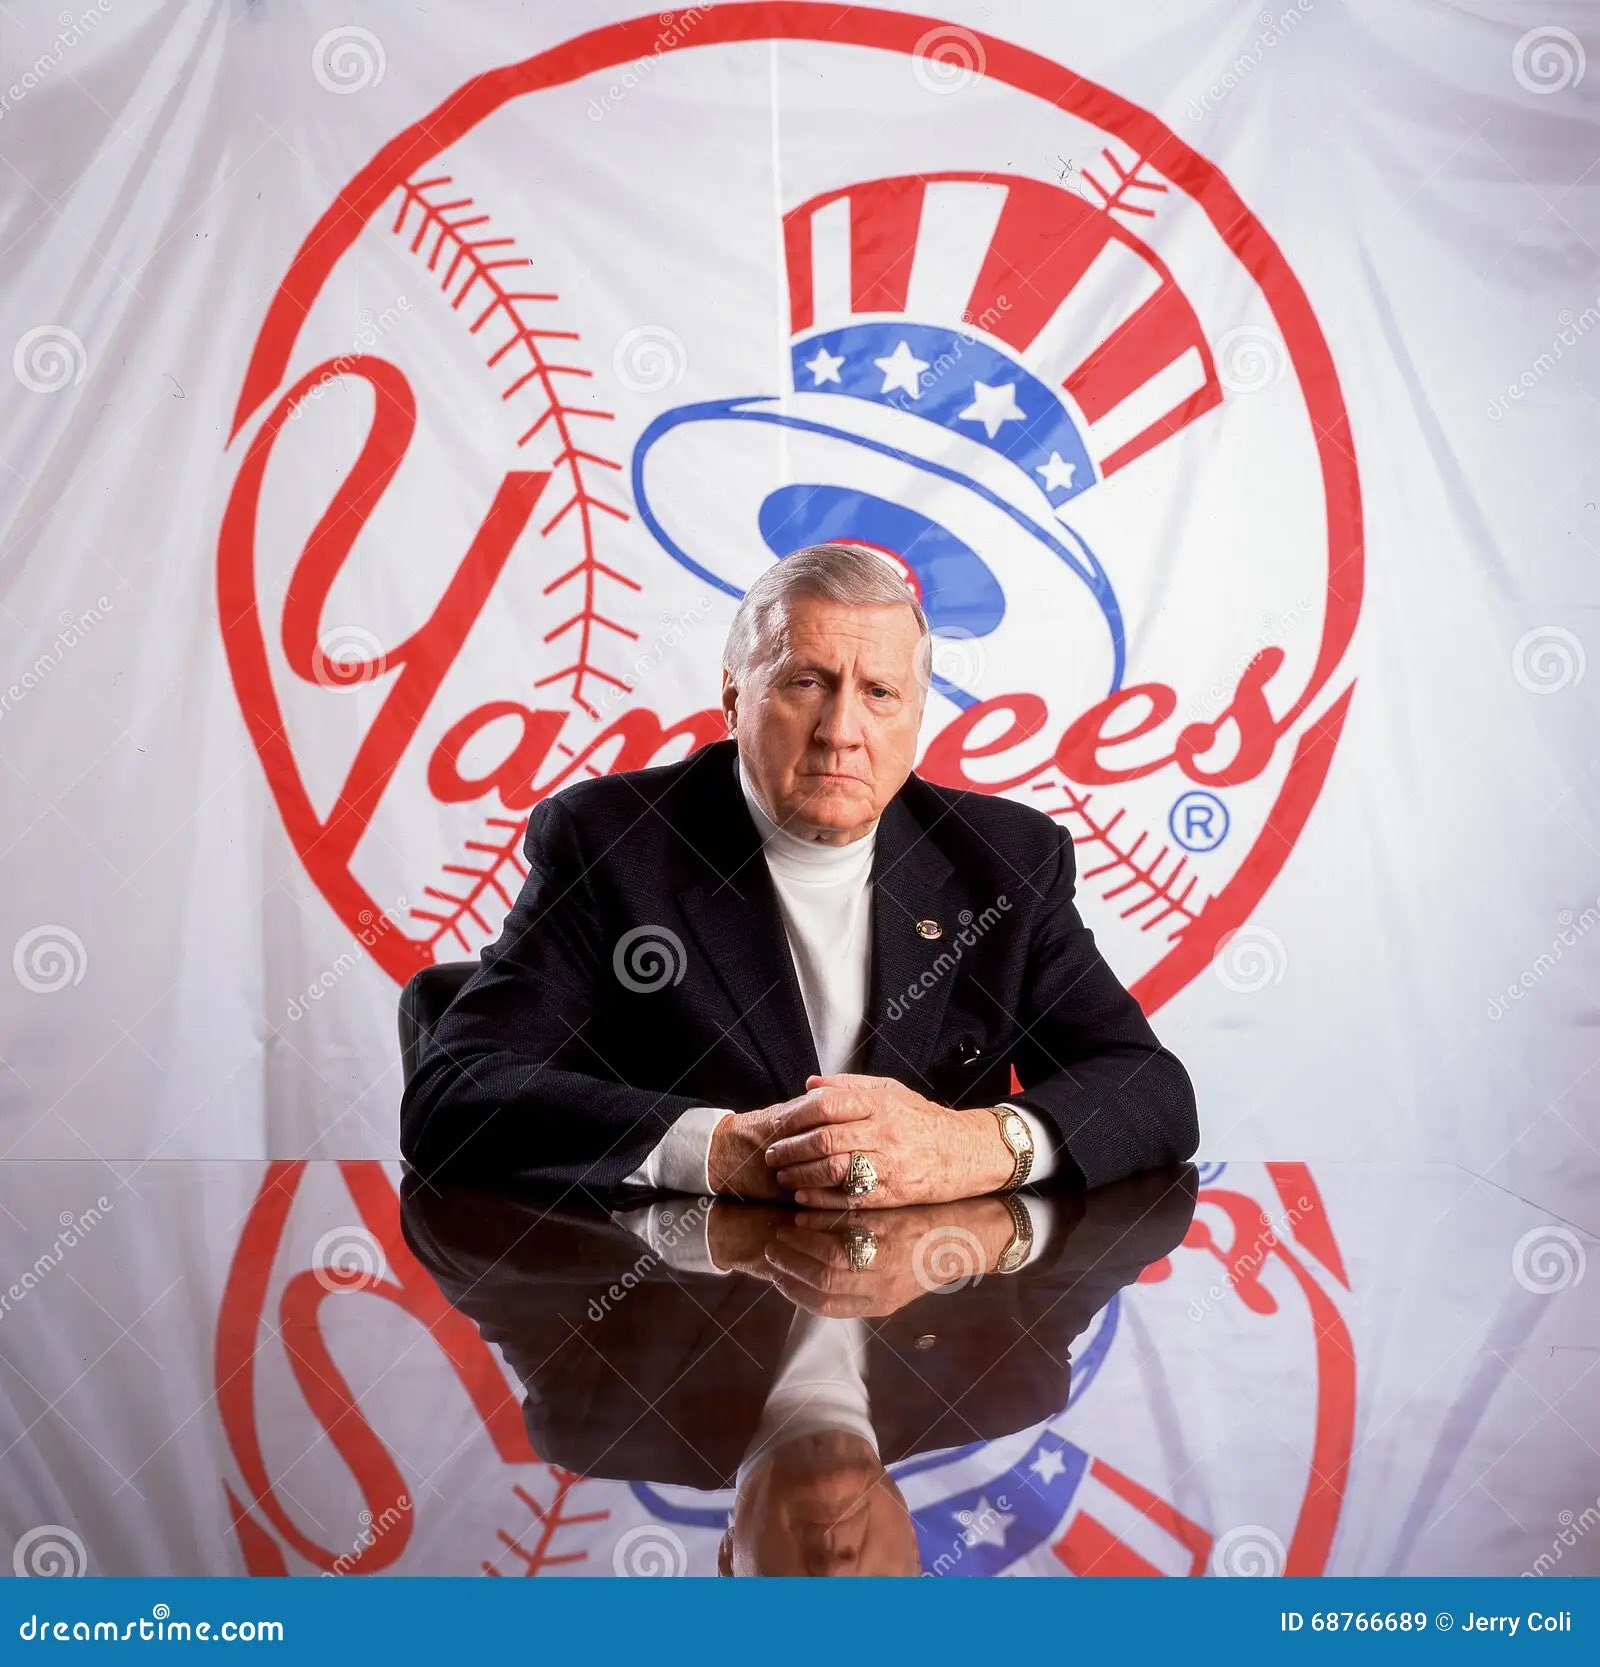 Happy birthday to the greatest country and team owner in the world, America and George Steinbrenner! 